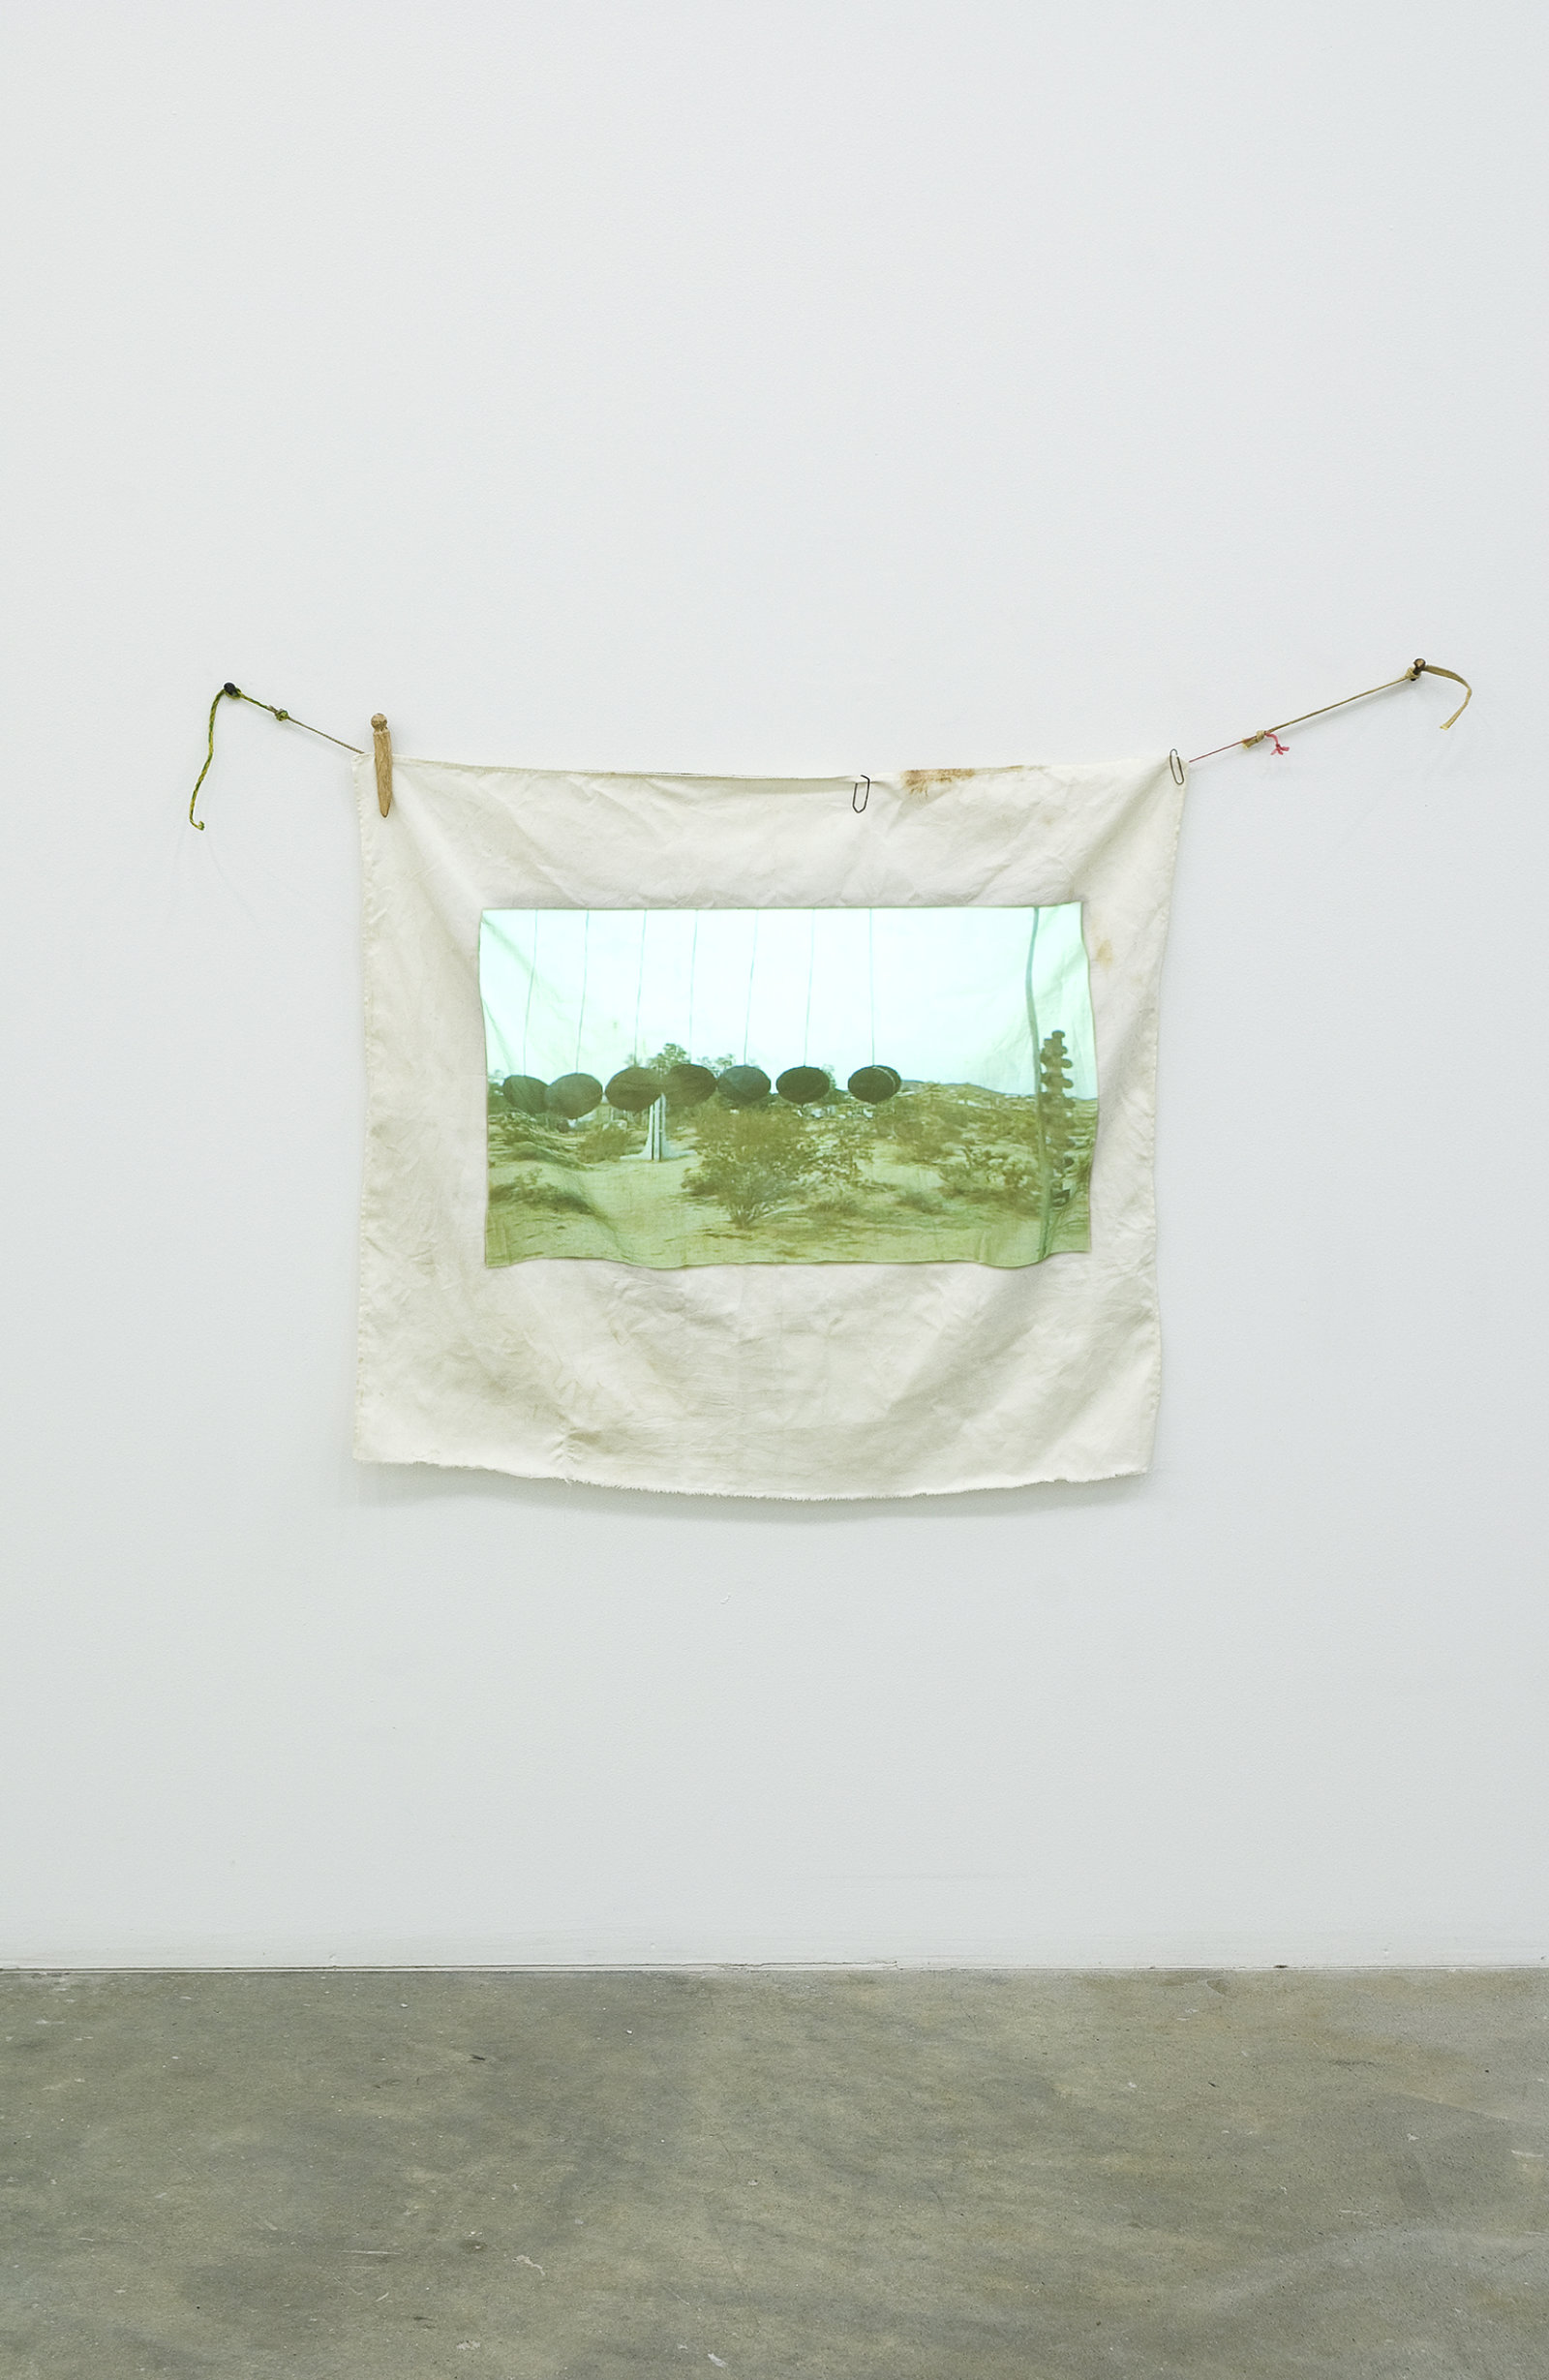 Ashes Withyman, Travel Without Movement from Uncertain Pilgrimage, 2006–2007, dvd projection, cloth projection screen, clothespins, paperclips, string, 32 x 41 in. (80 x 105 cm), 12 minutes, 10 seconds